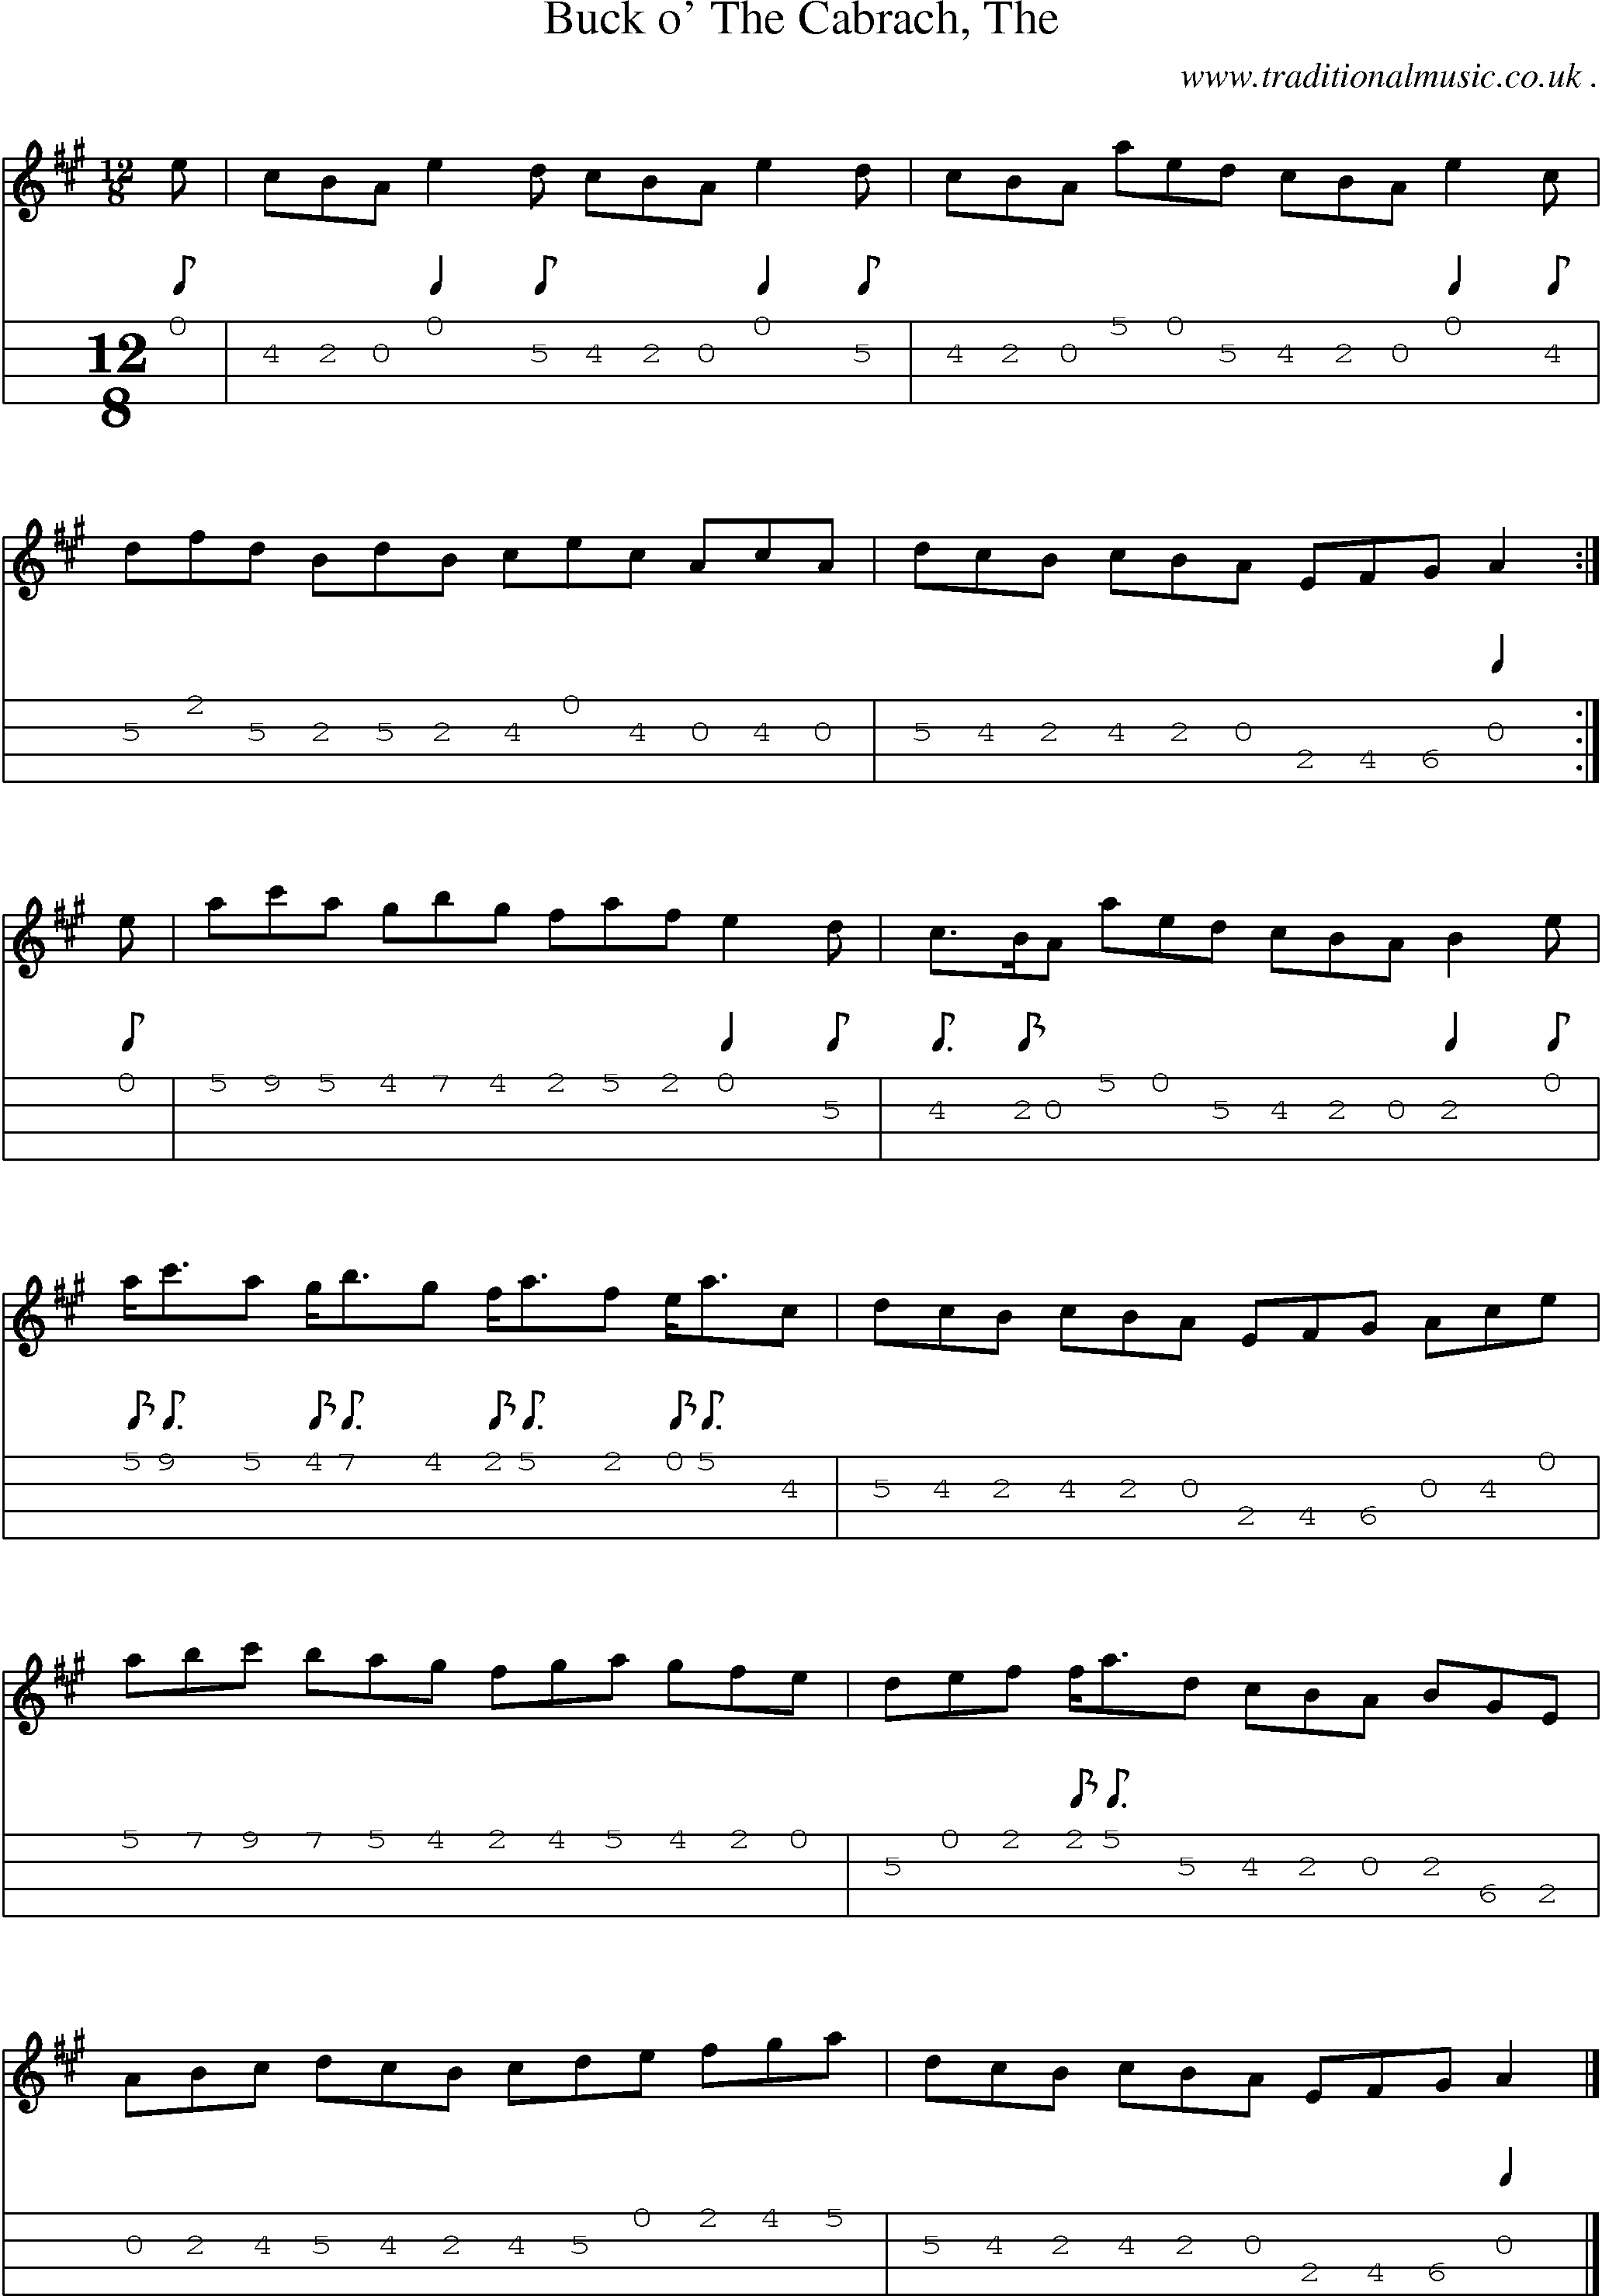 Sheet-music  score, Chords and Mandolin Tabs for Buck O The Cabrach The